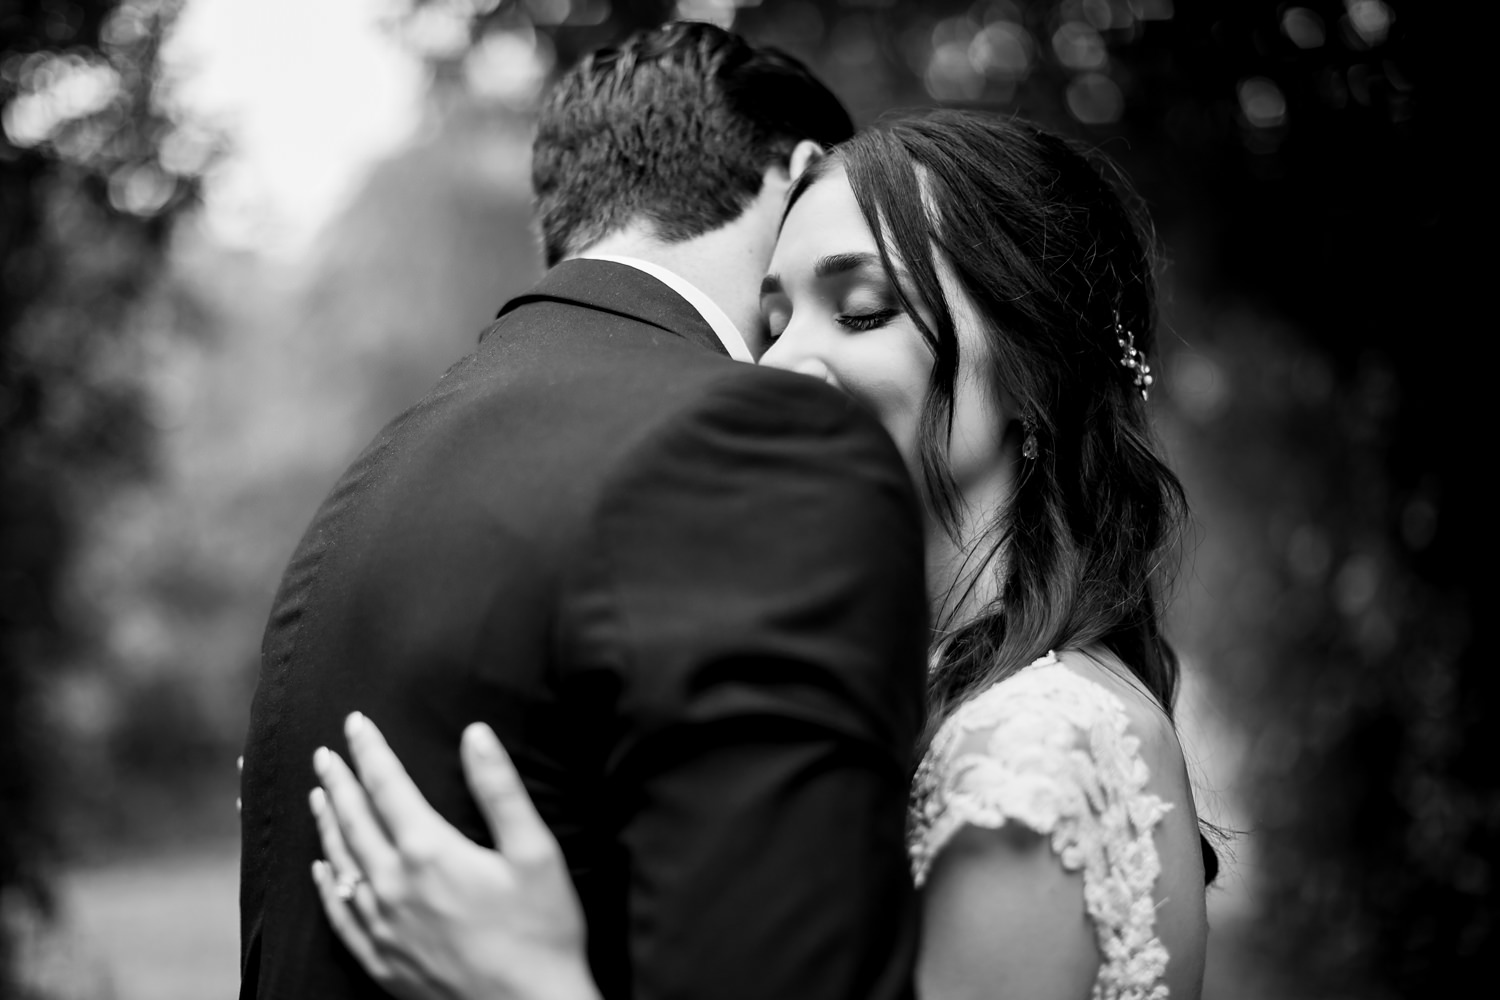 Wedding photographer in South Africa captures a tender and romantic moment between the bride and groom captured in black and white during the couple photo session on their wedding day